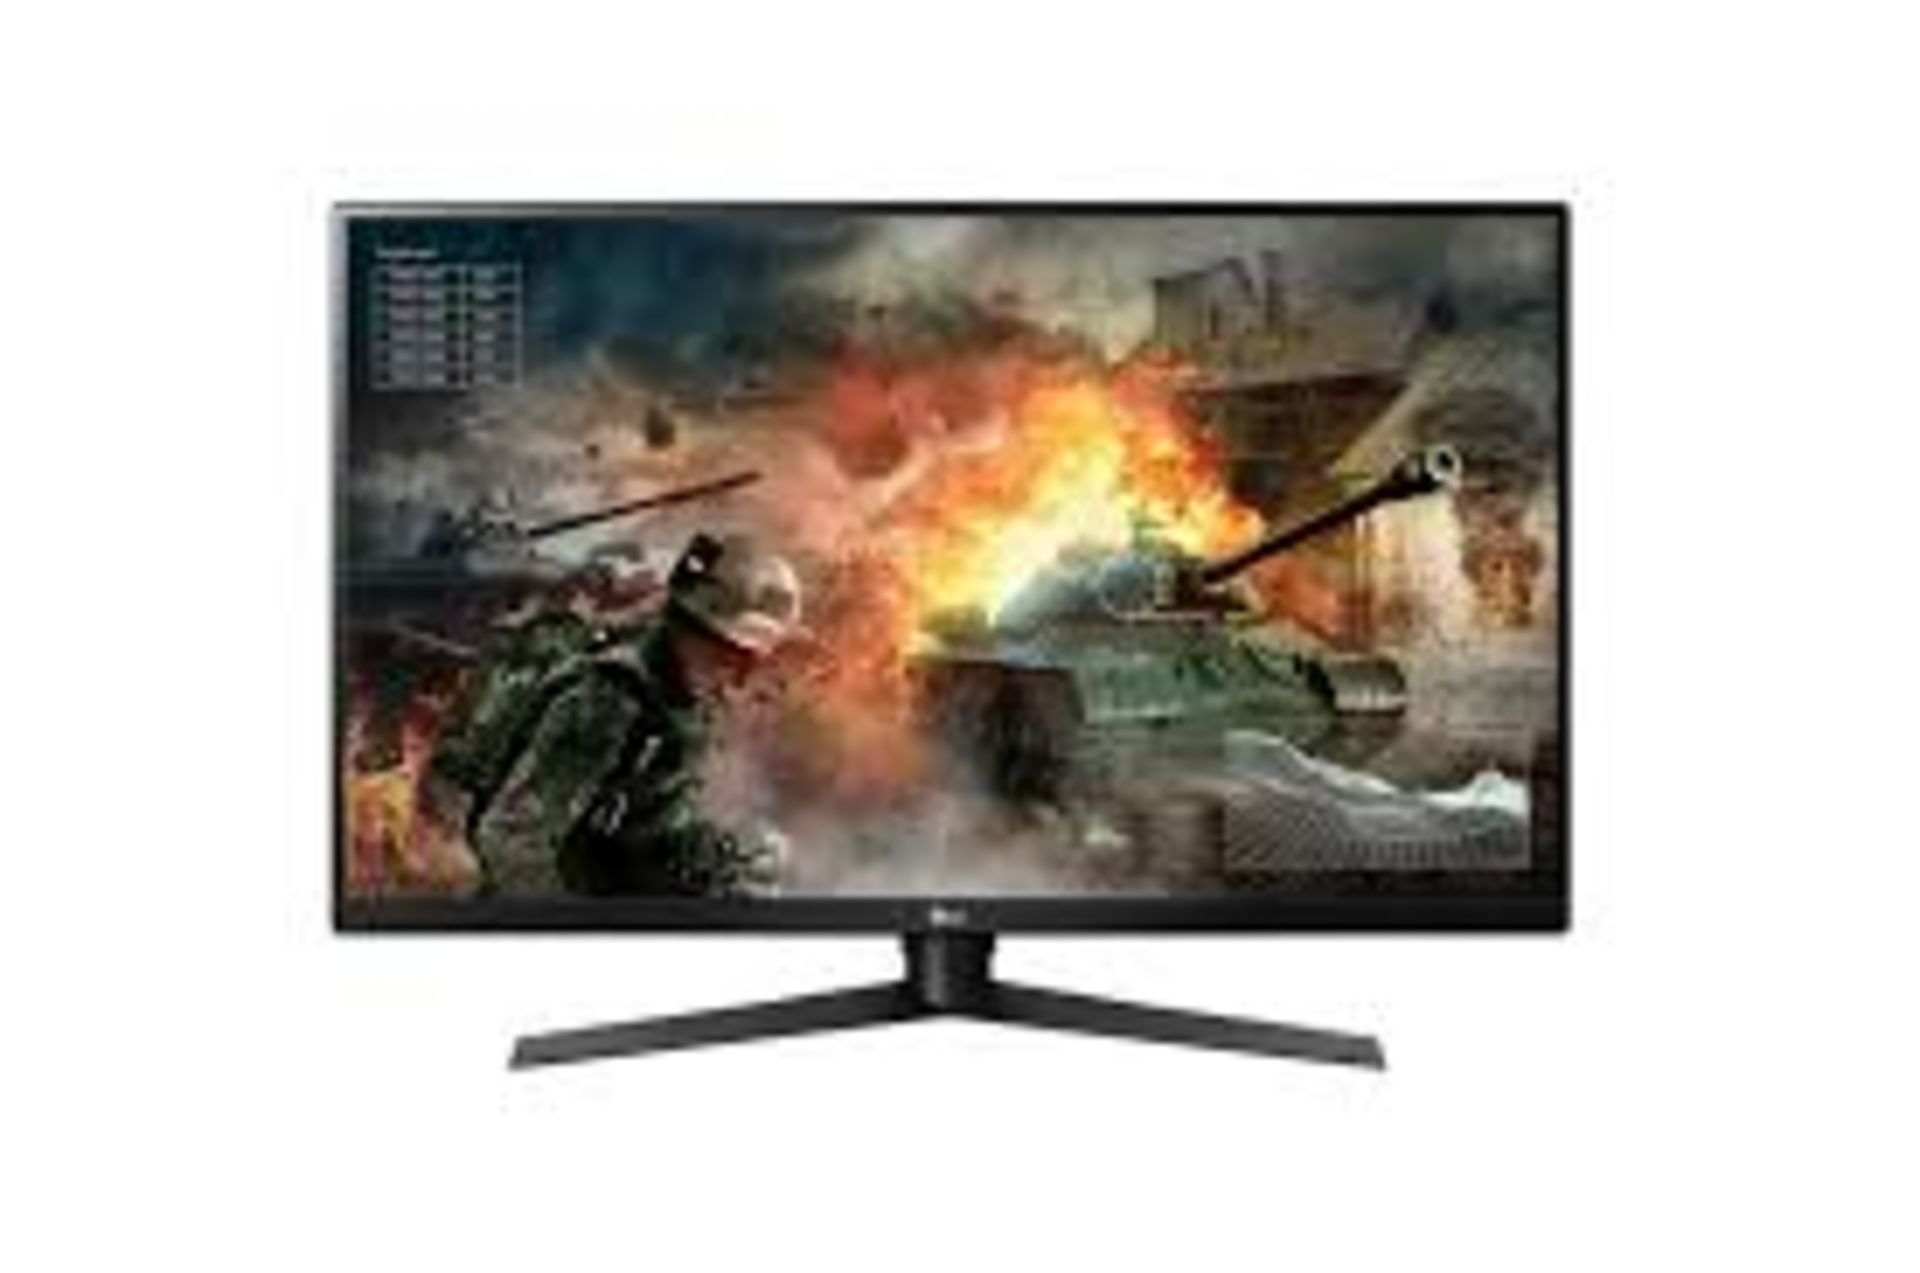 + VAT Grade A 32In QHD GAMING MONITOR WITH G-SYNC - HDMI DISPLAY PORT USB 3.0 - FRAME LESS DESIGN